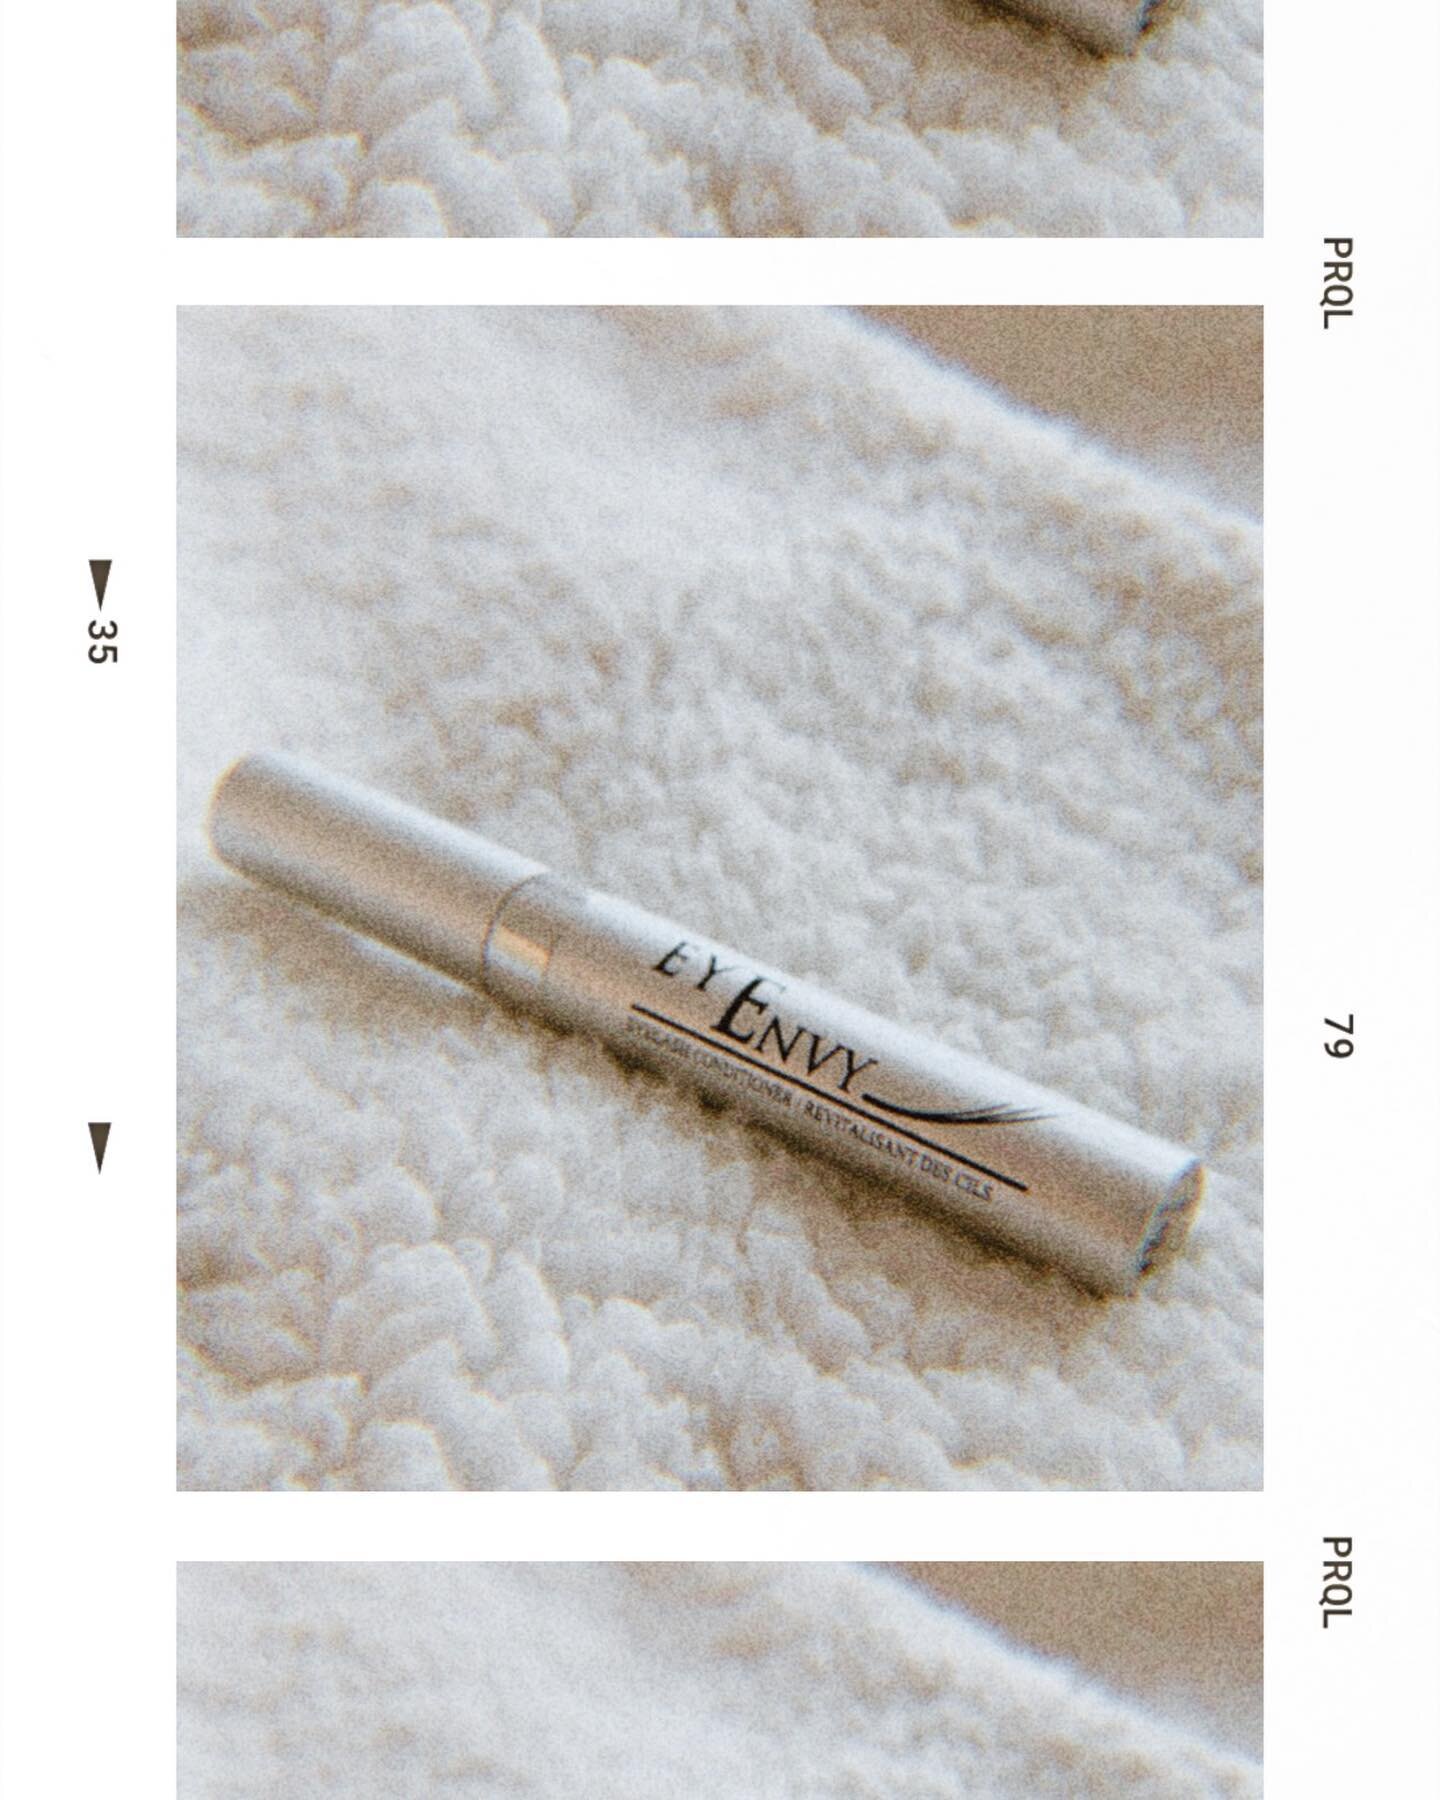 So for the past few months, I took a break from my trusty EyEnvy Eyelash Conditioner to try a different brand. It&rsquo;s important for me to try other products because there&rsquo;s always something new on the market and I want the best for my clien